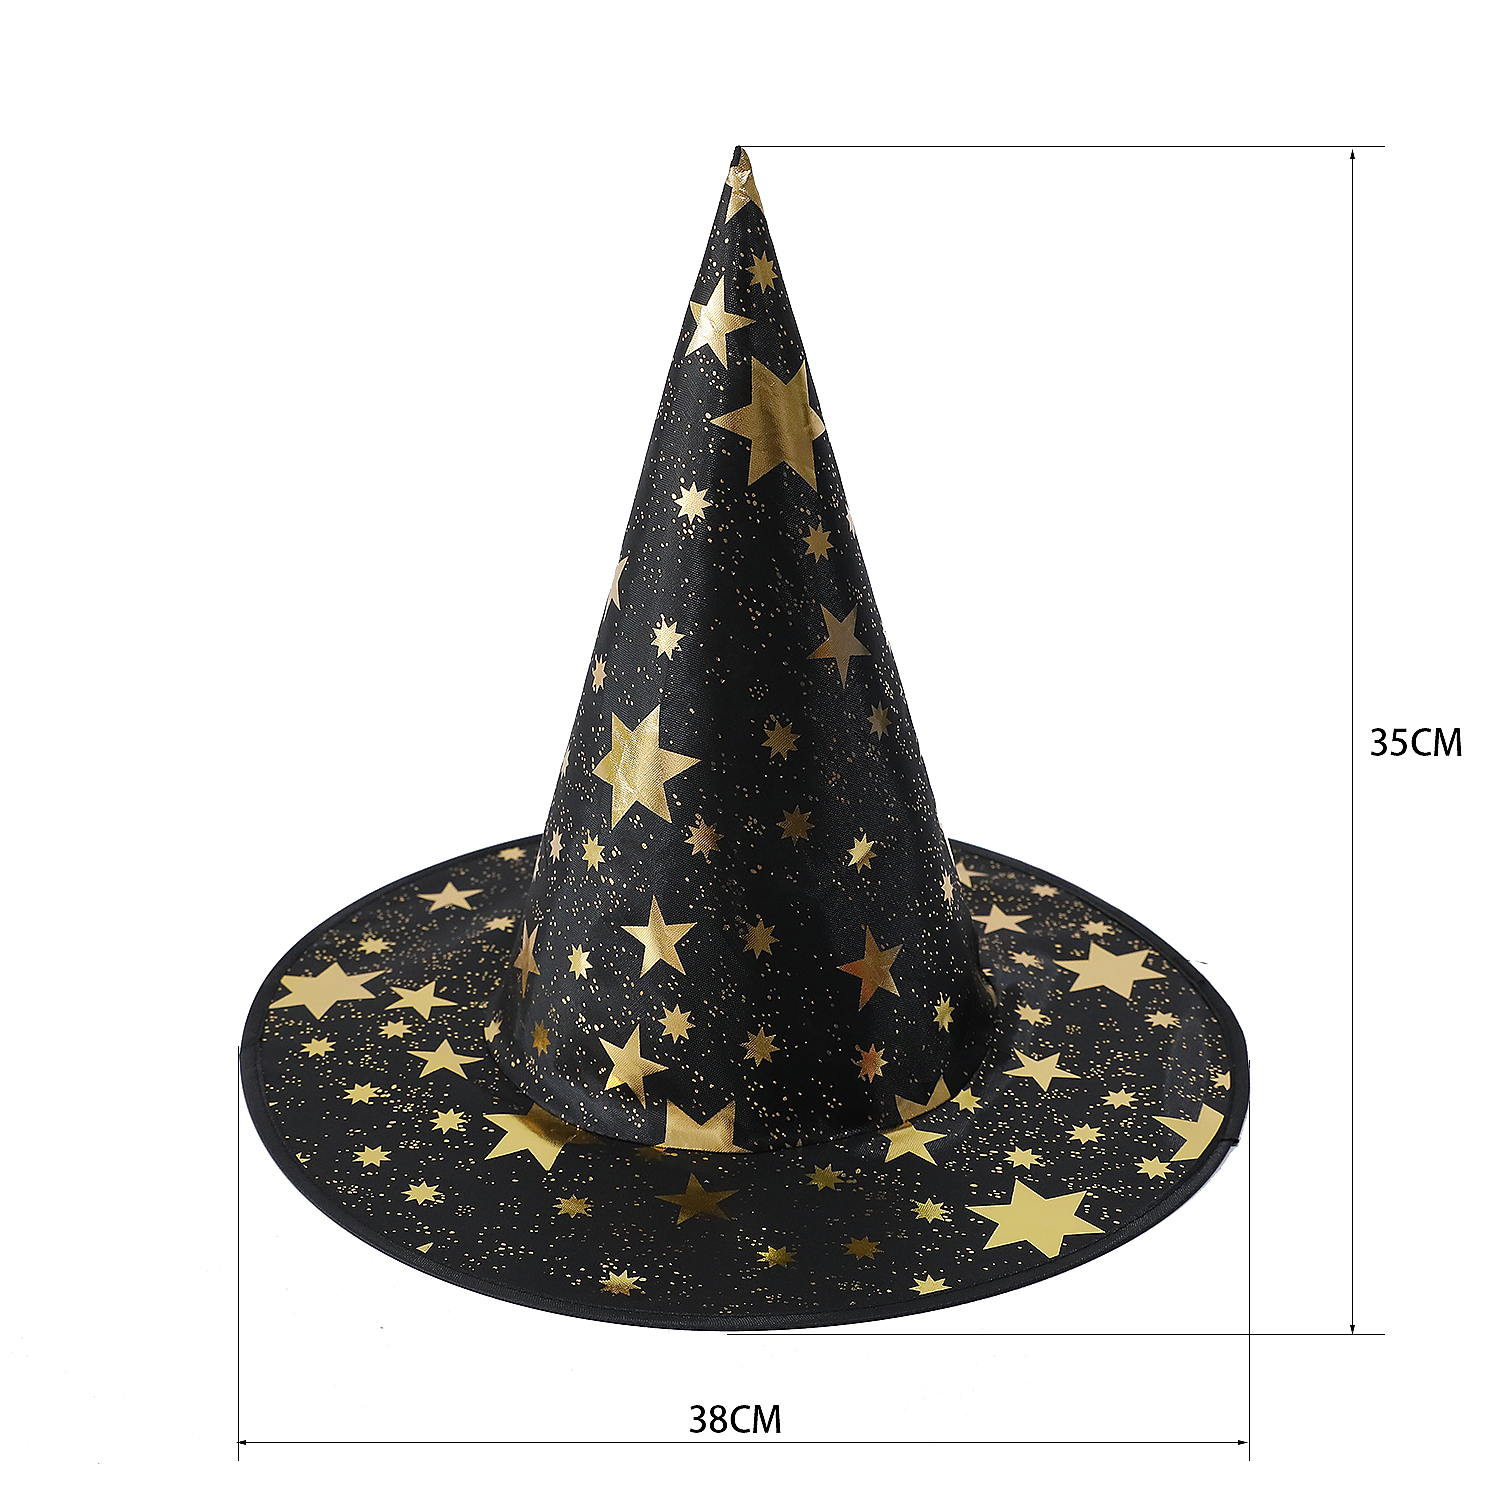 1pcs 2022 New Fashion Pentagram Party Cosplay Halloween Hat Personality Unisex Wizard Hat Pointed Cap for Party Yard Decorations